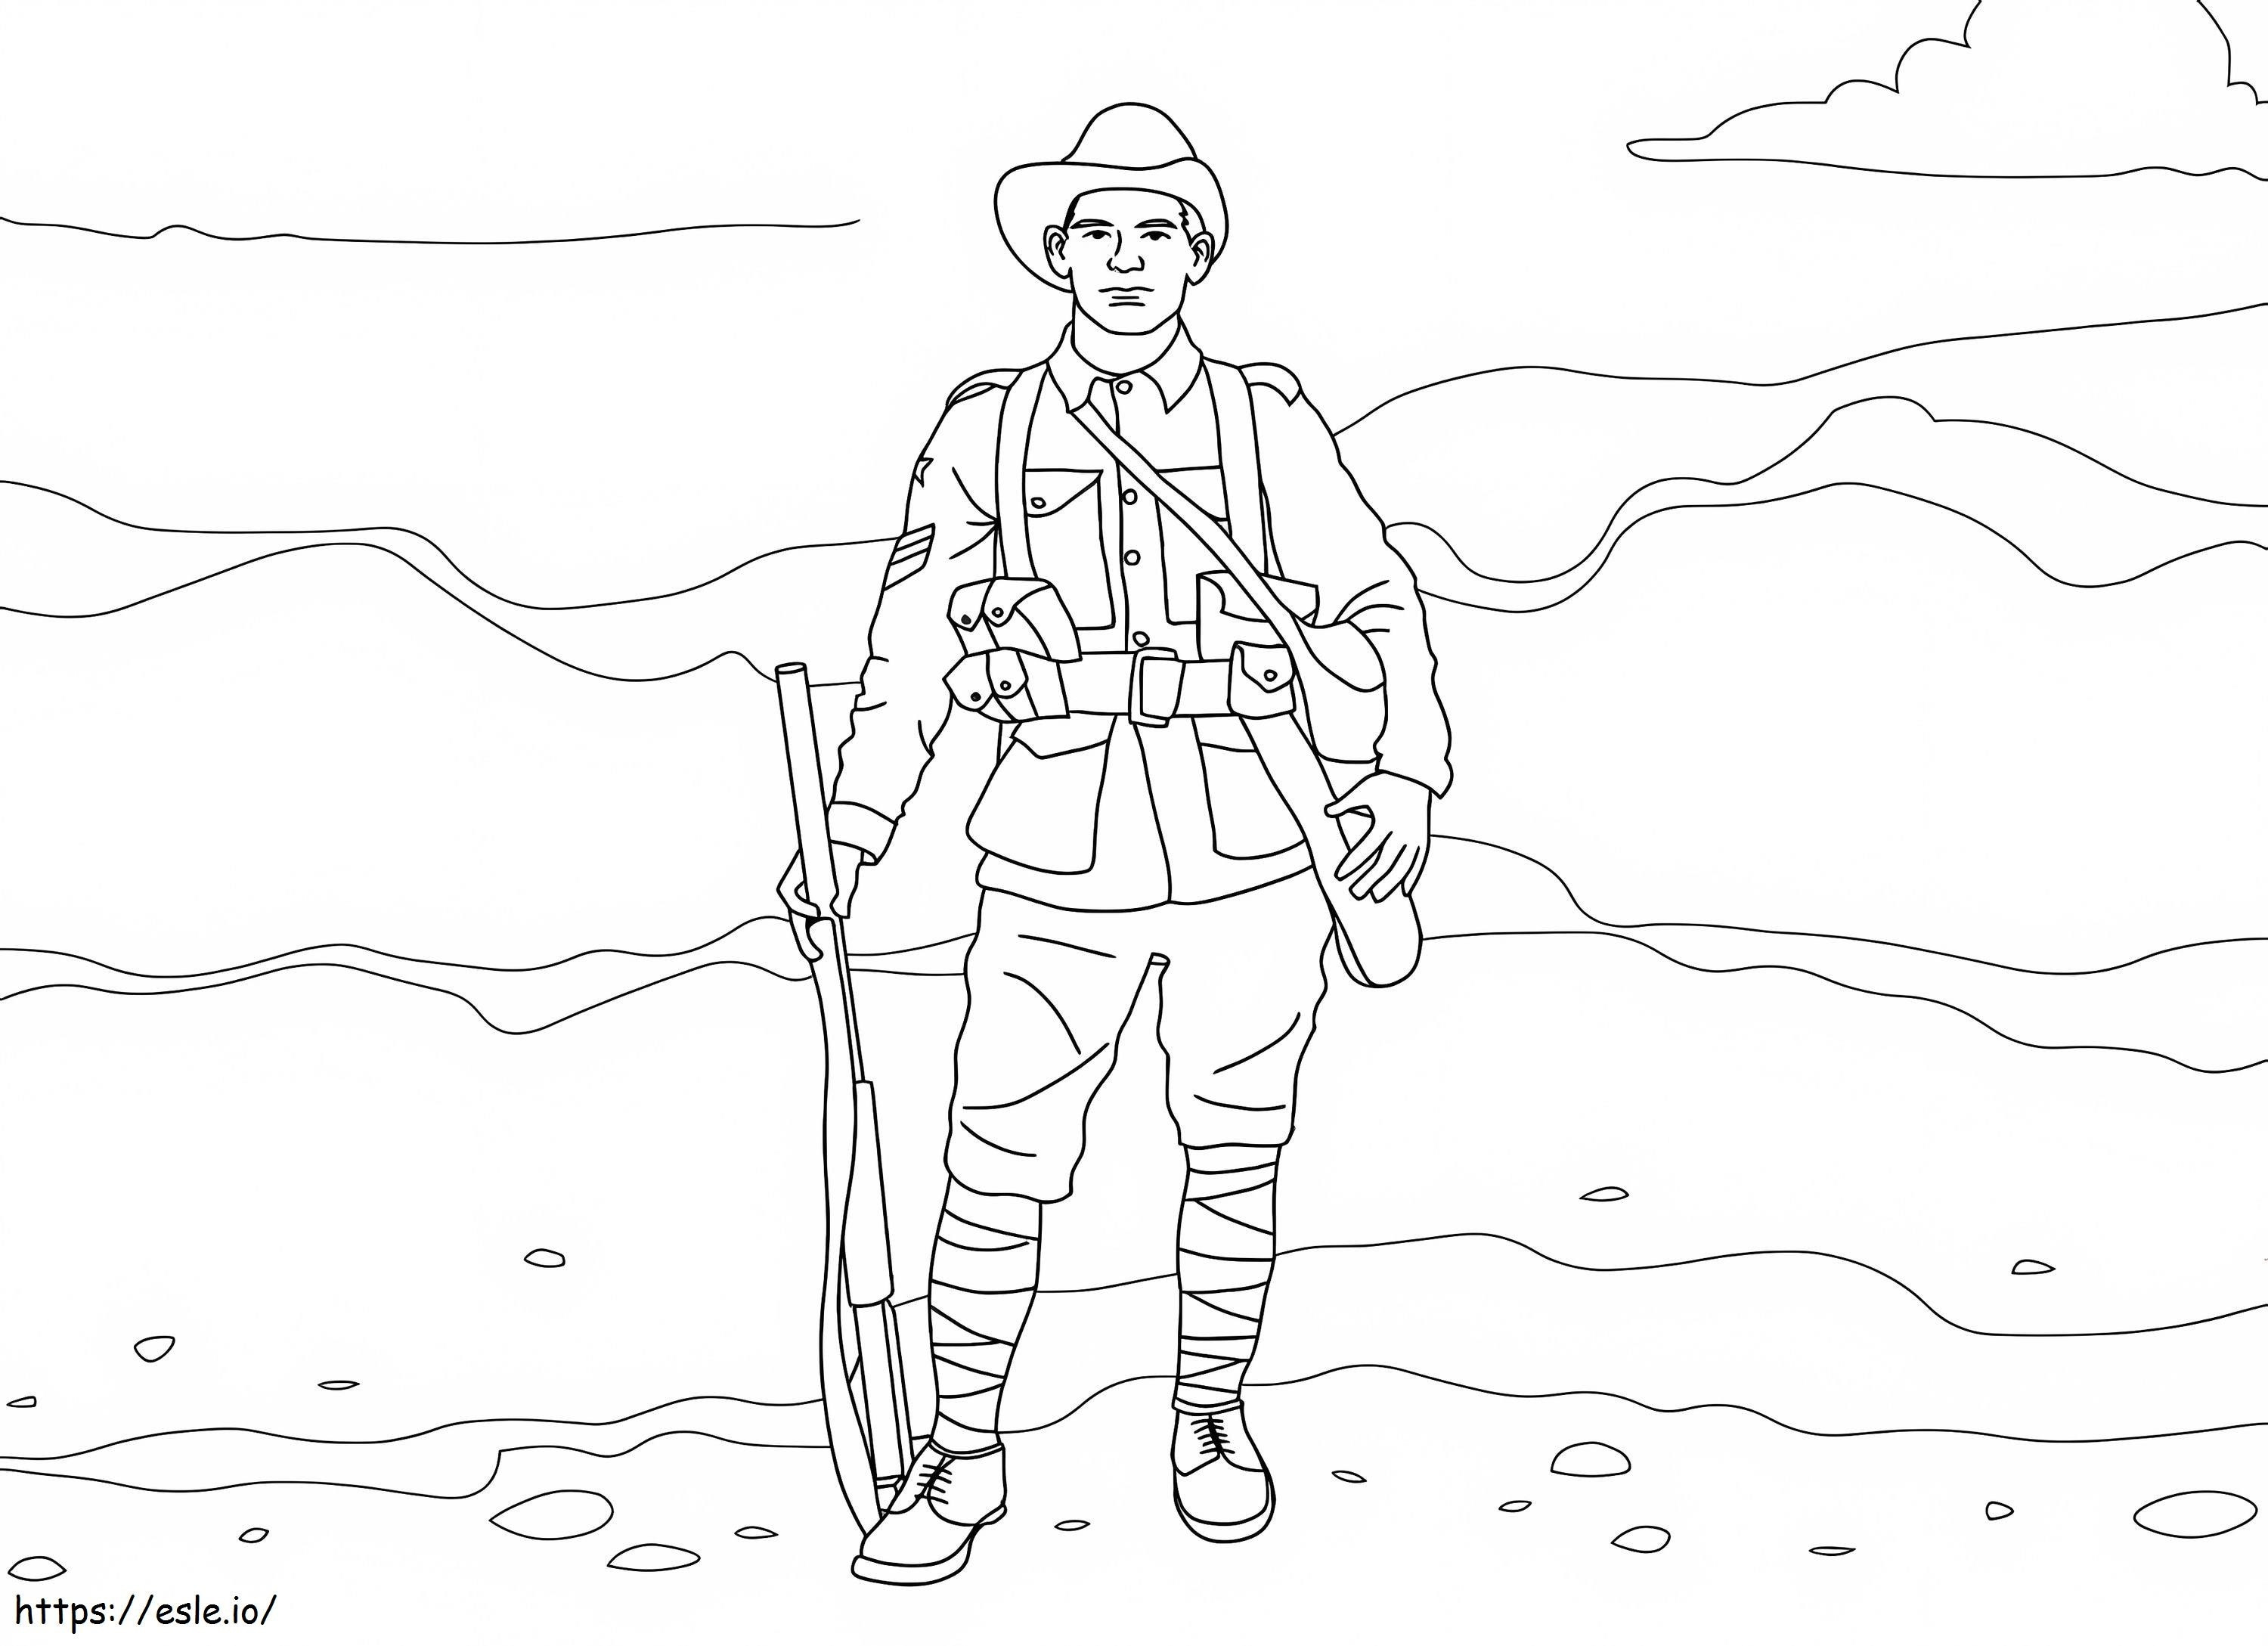 Cool Soldier With A Gun coloring page